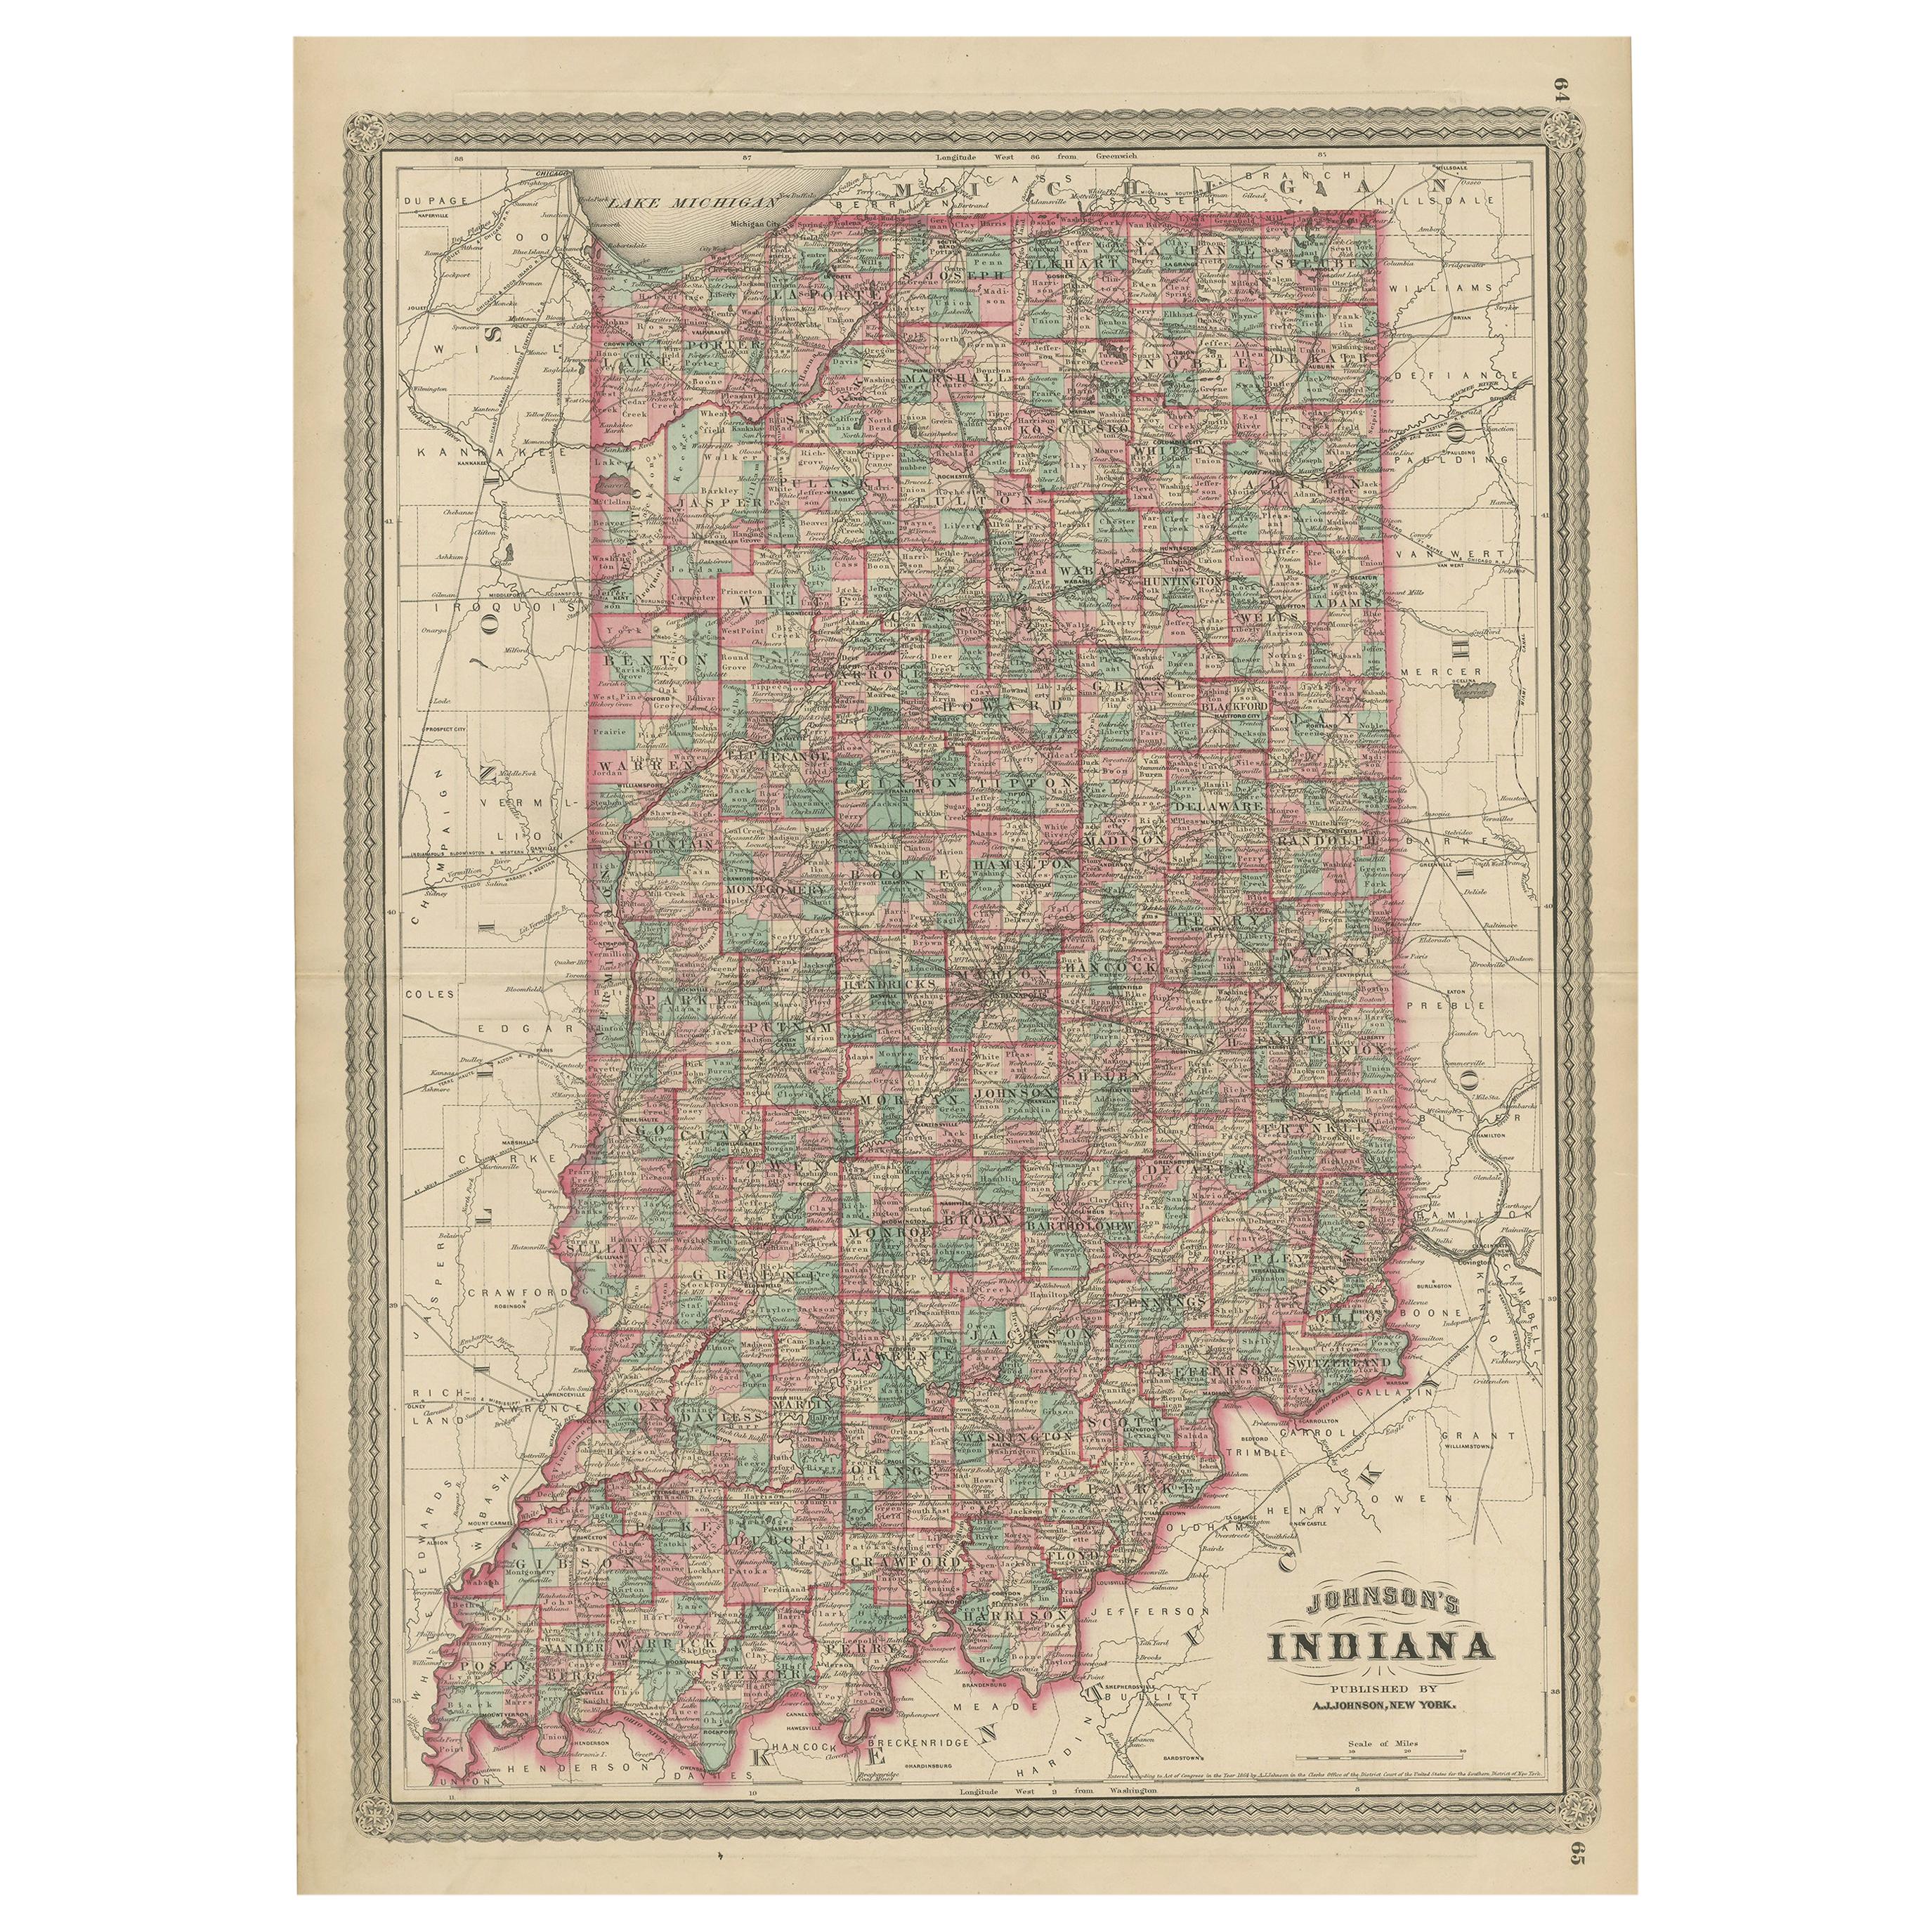 Antique Map of Indiana by Johnson, 1872